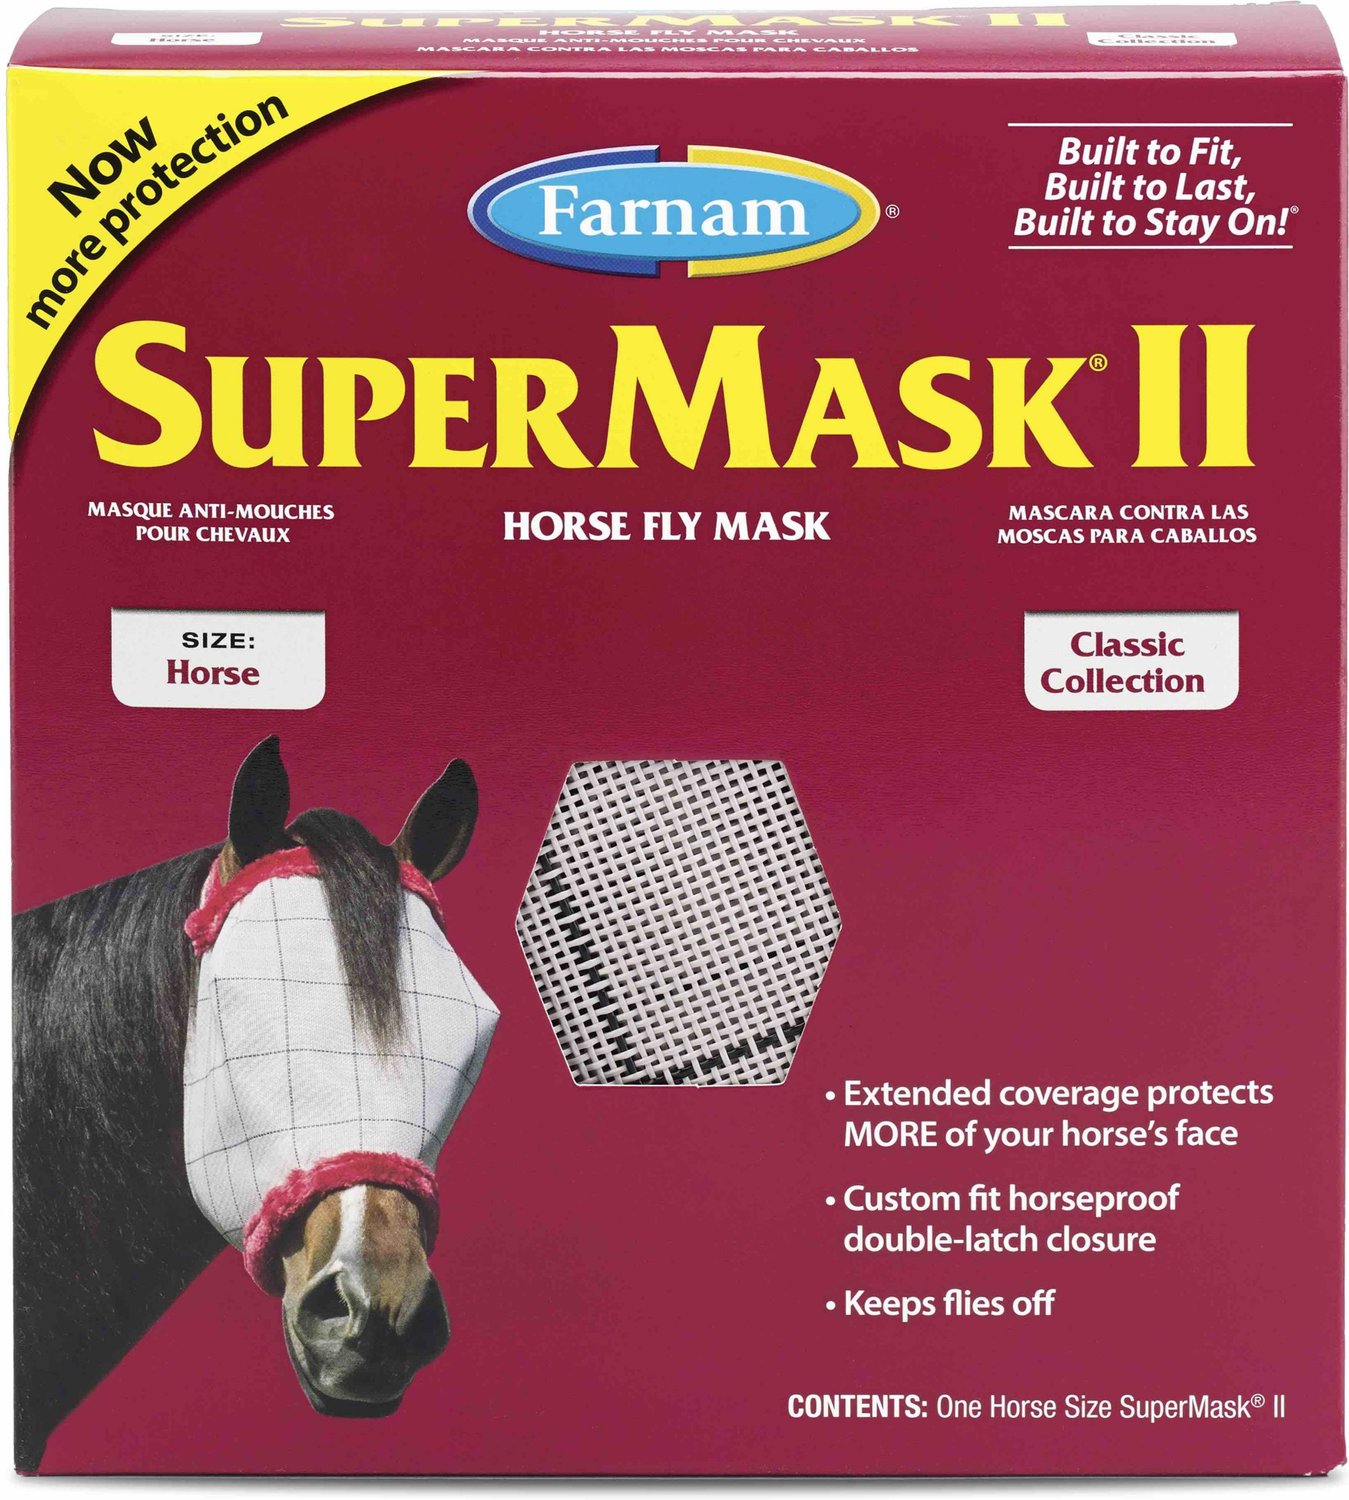 Farnam SuperMask II Horse Fly Mask Classic Collection